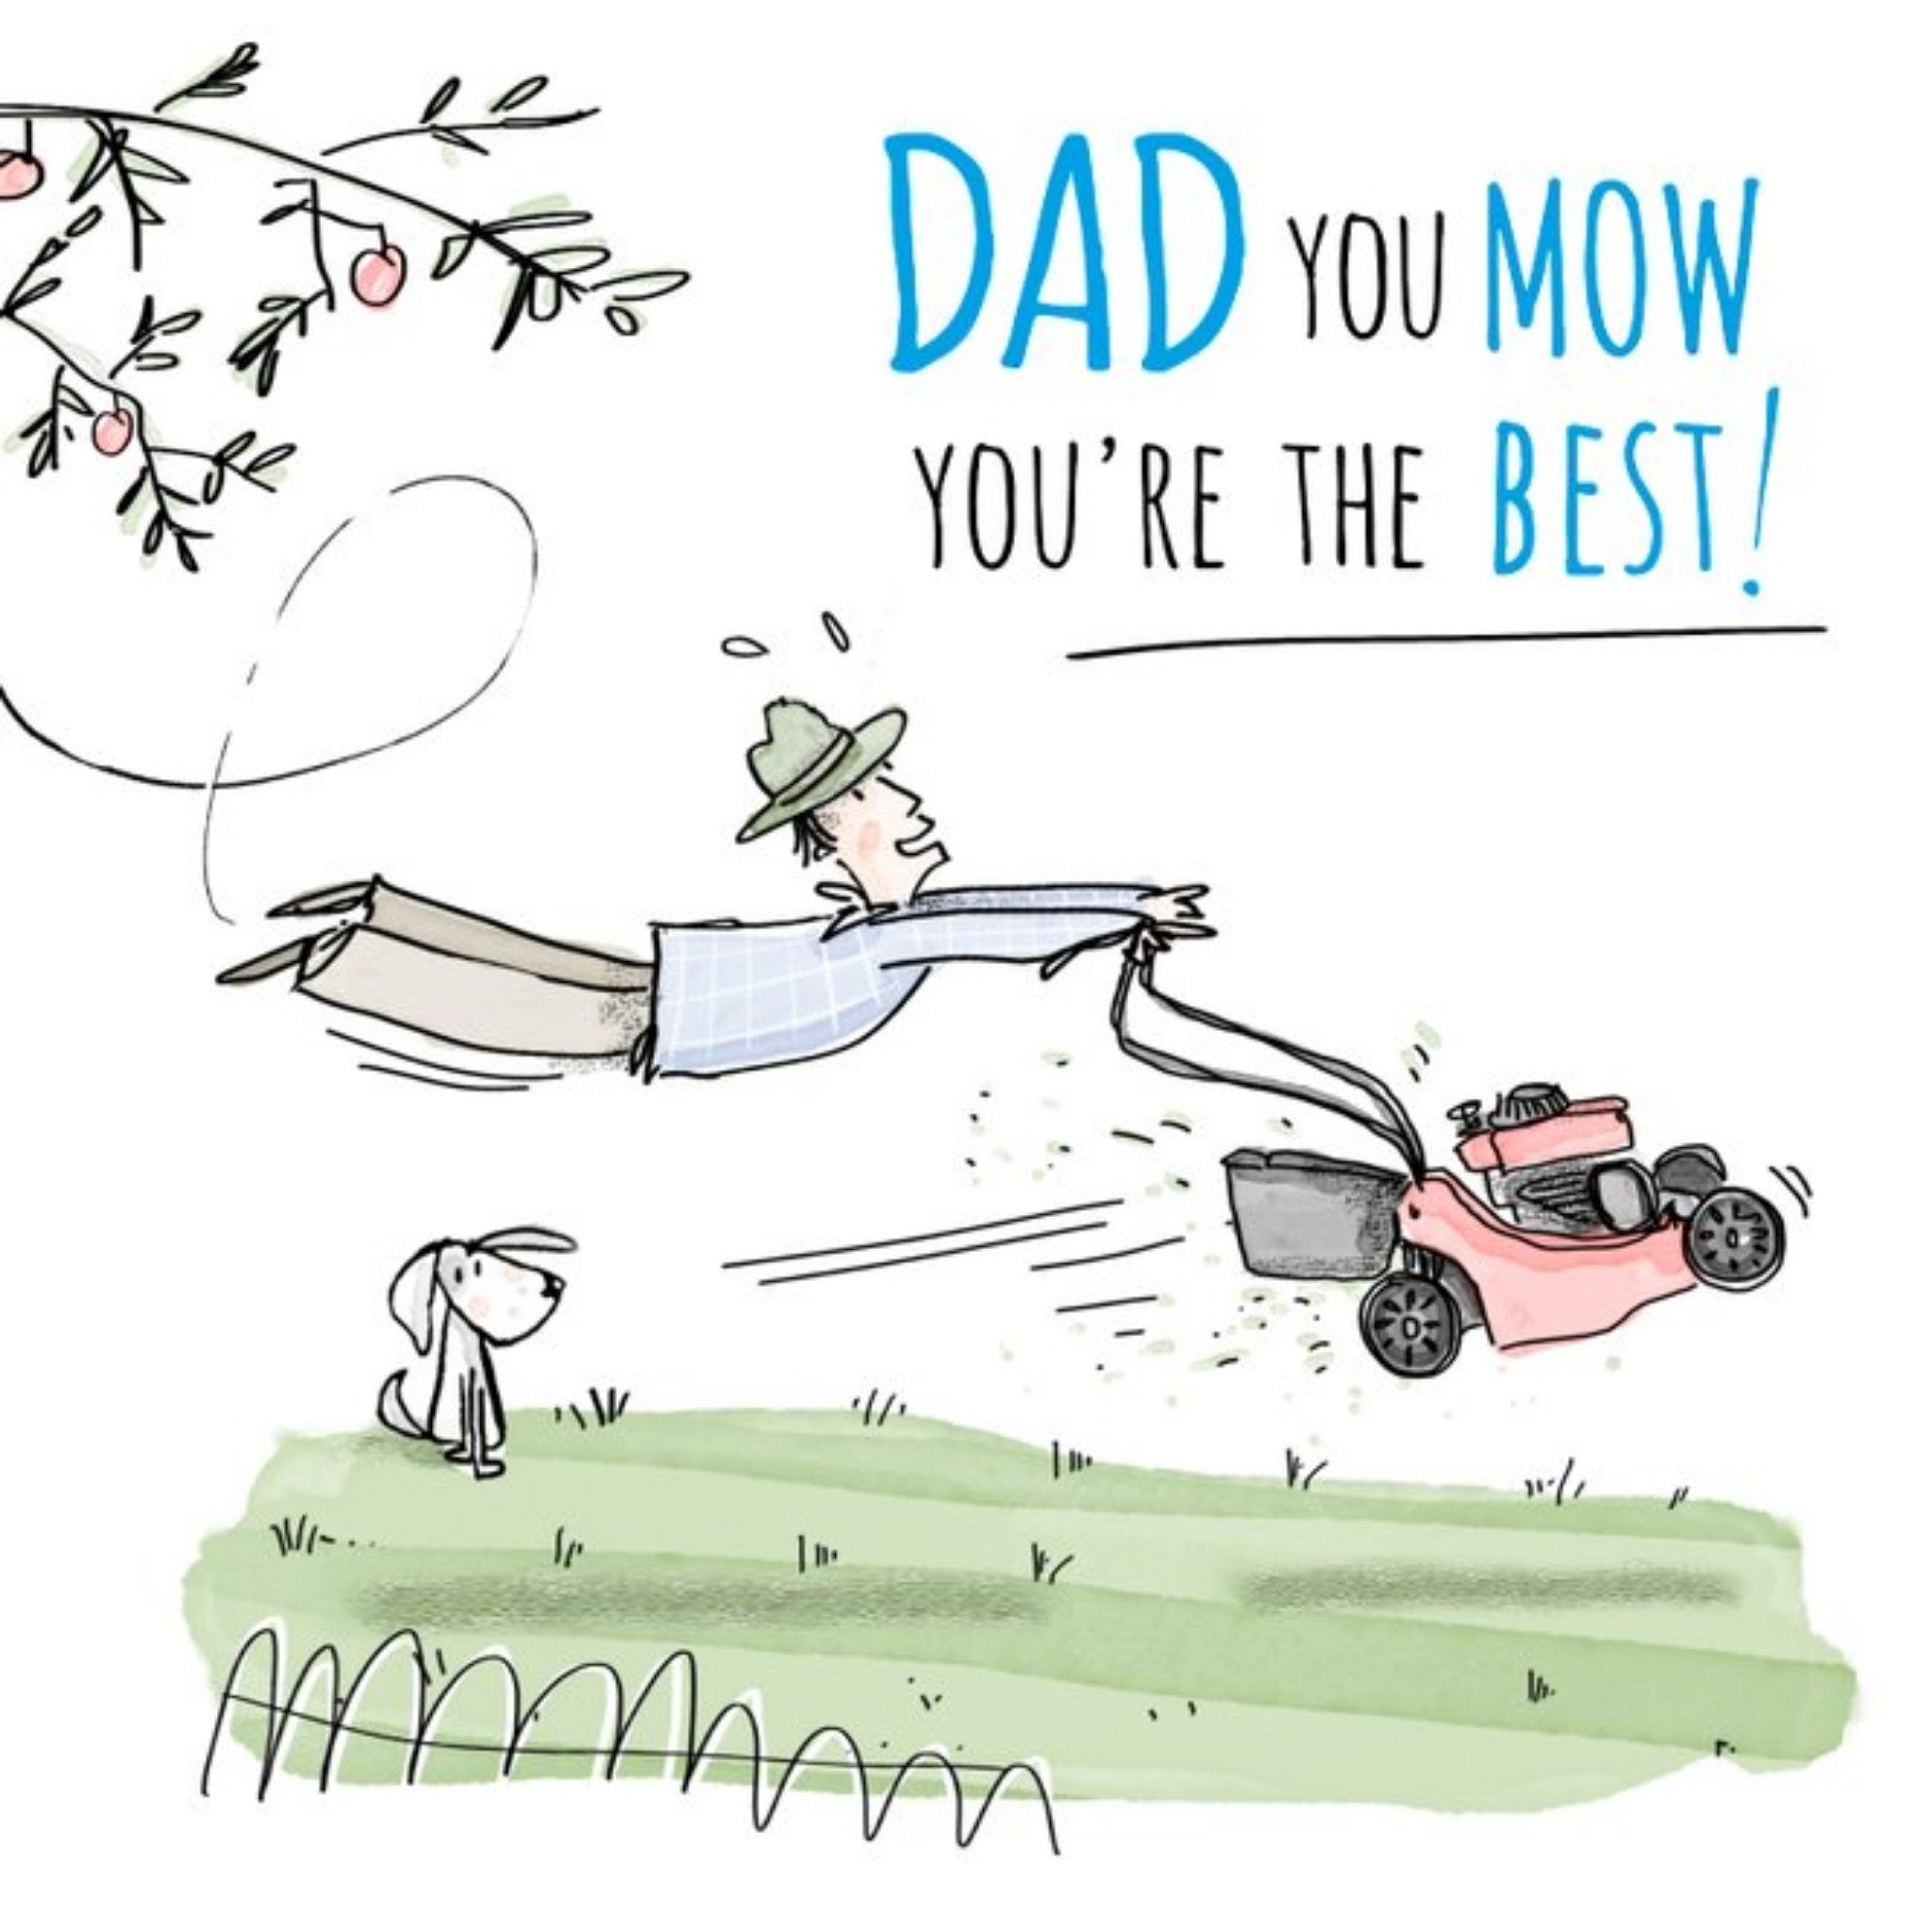 Moonpig Funny Dad You Mow You're The Best Birthday Card, Large